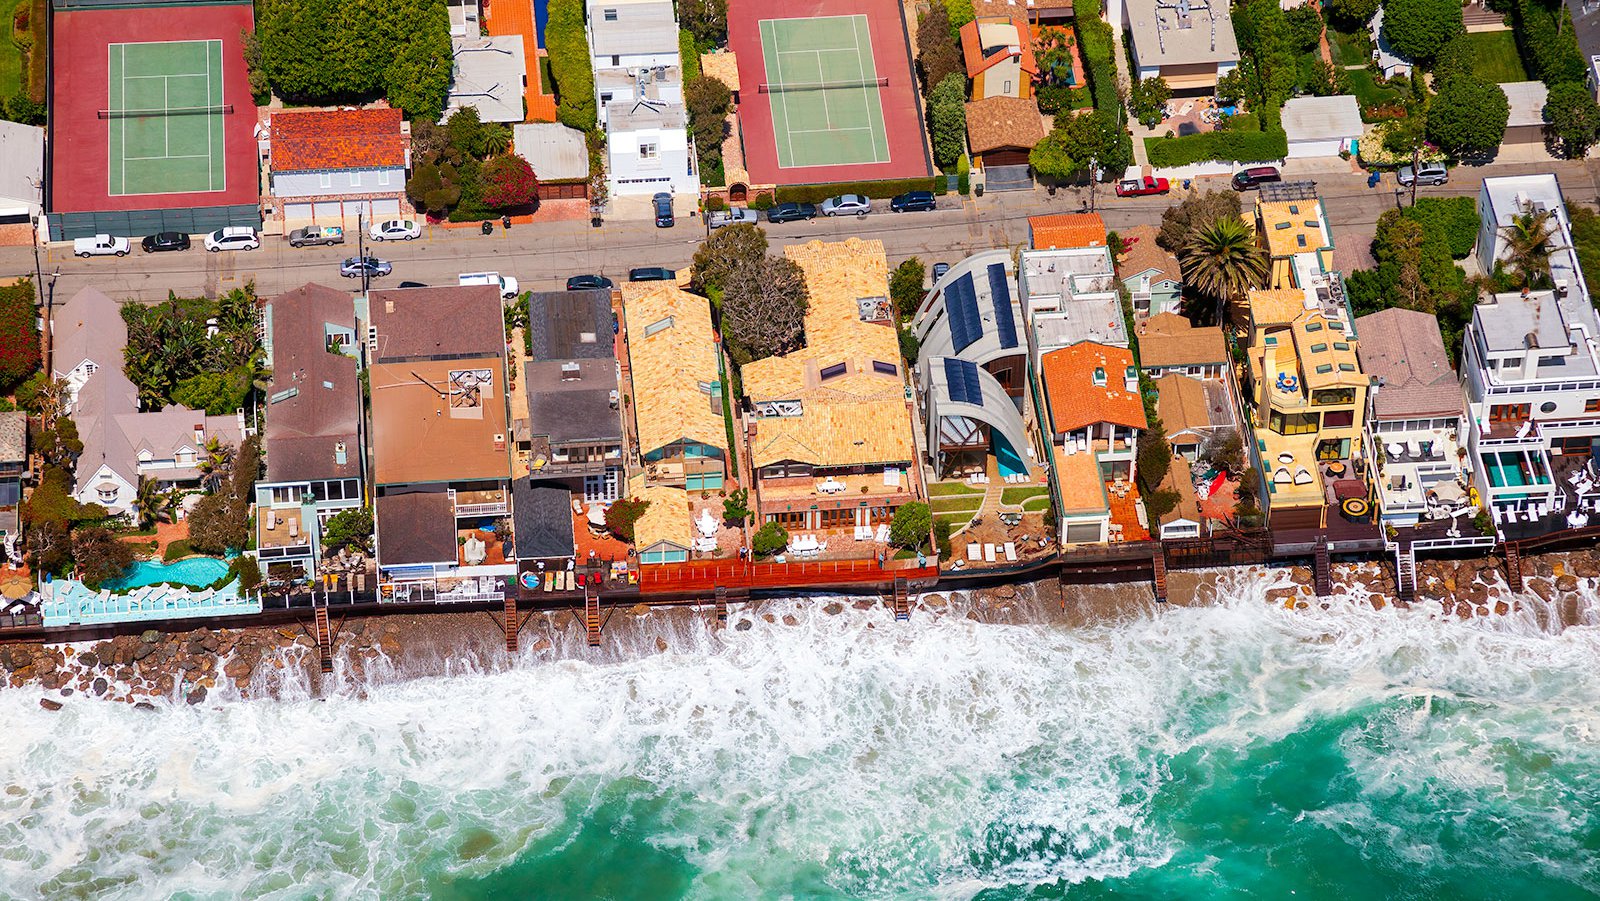 Press photo for Annenberg Space for Photography of Malibu homes facing coastal erosion